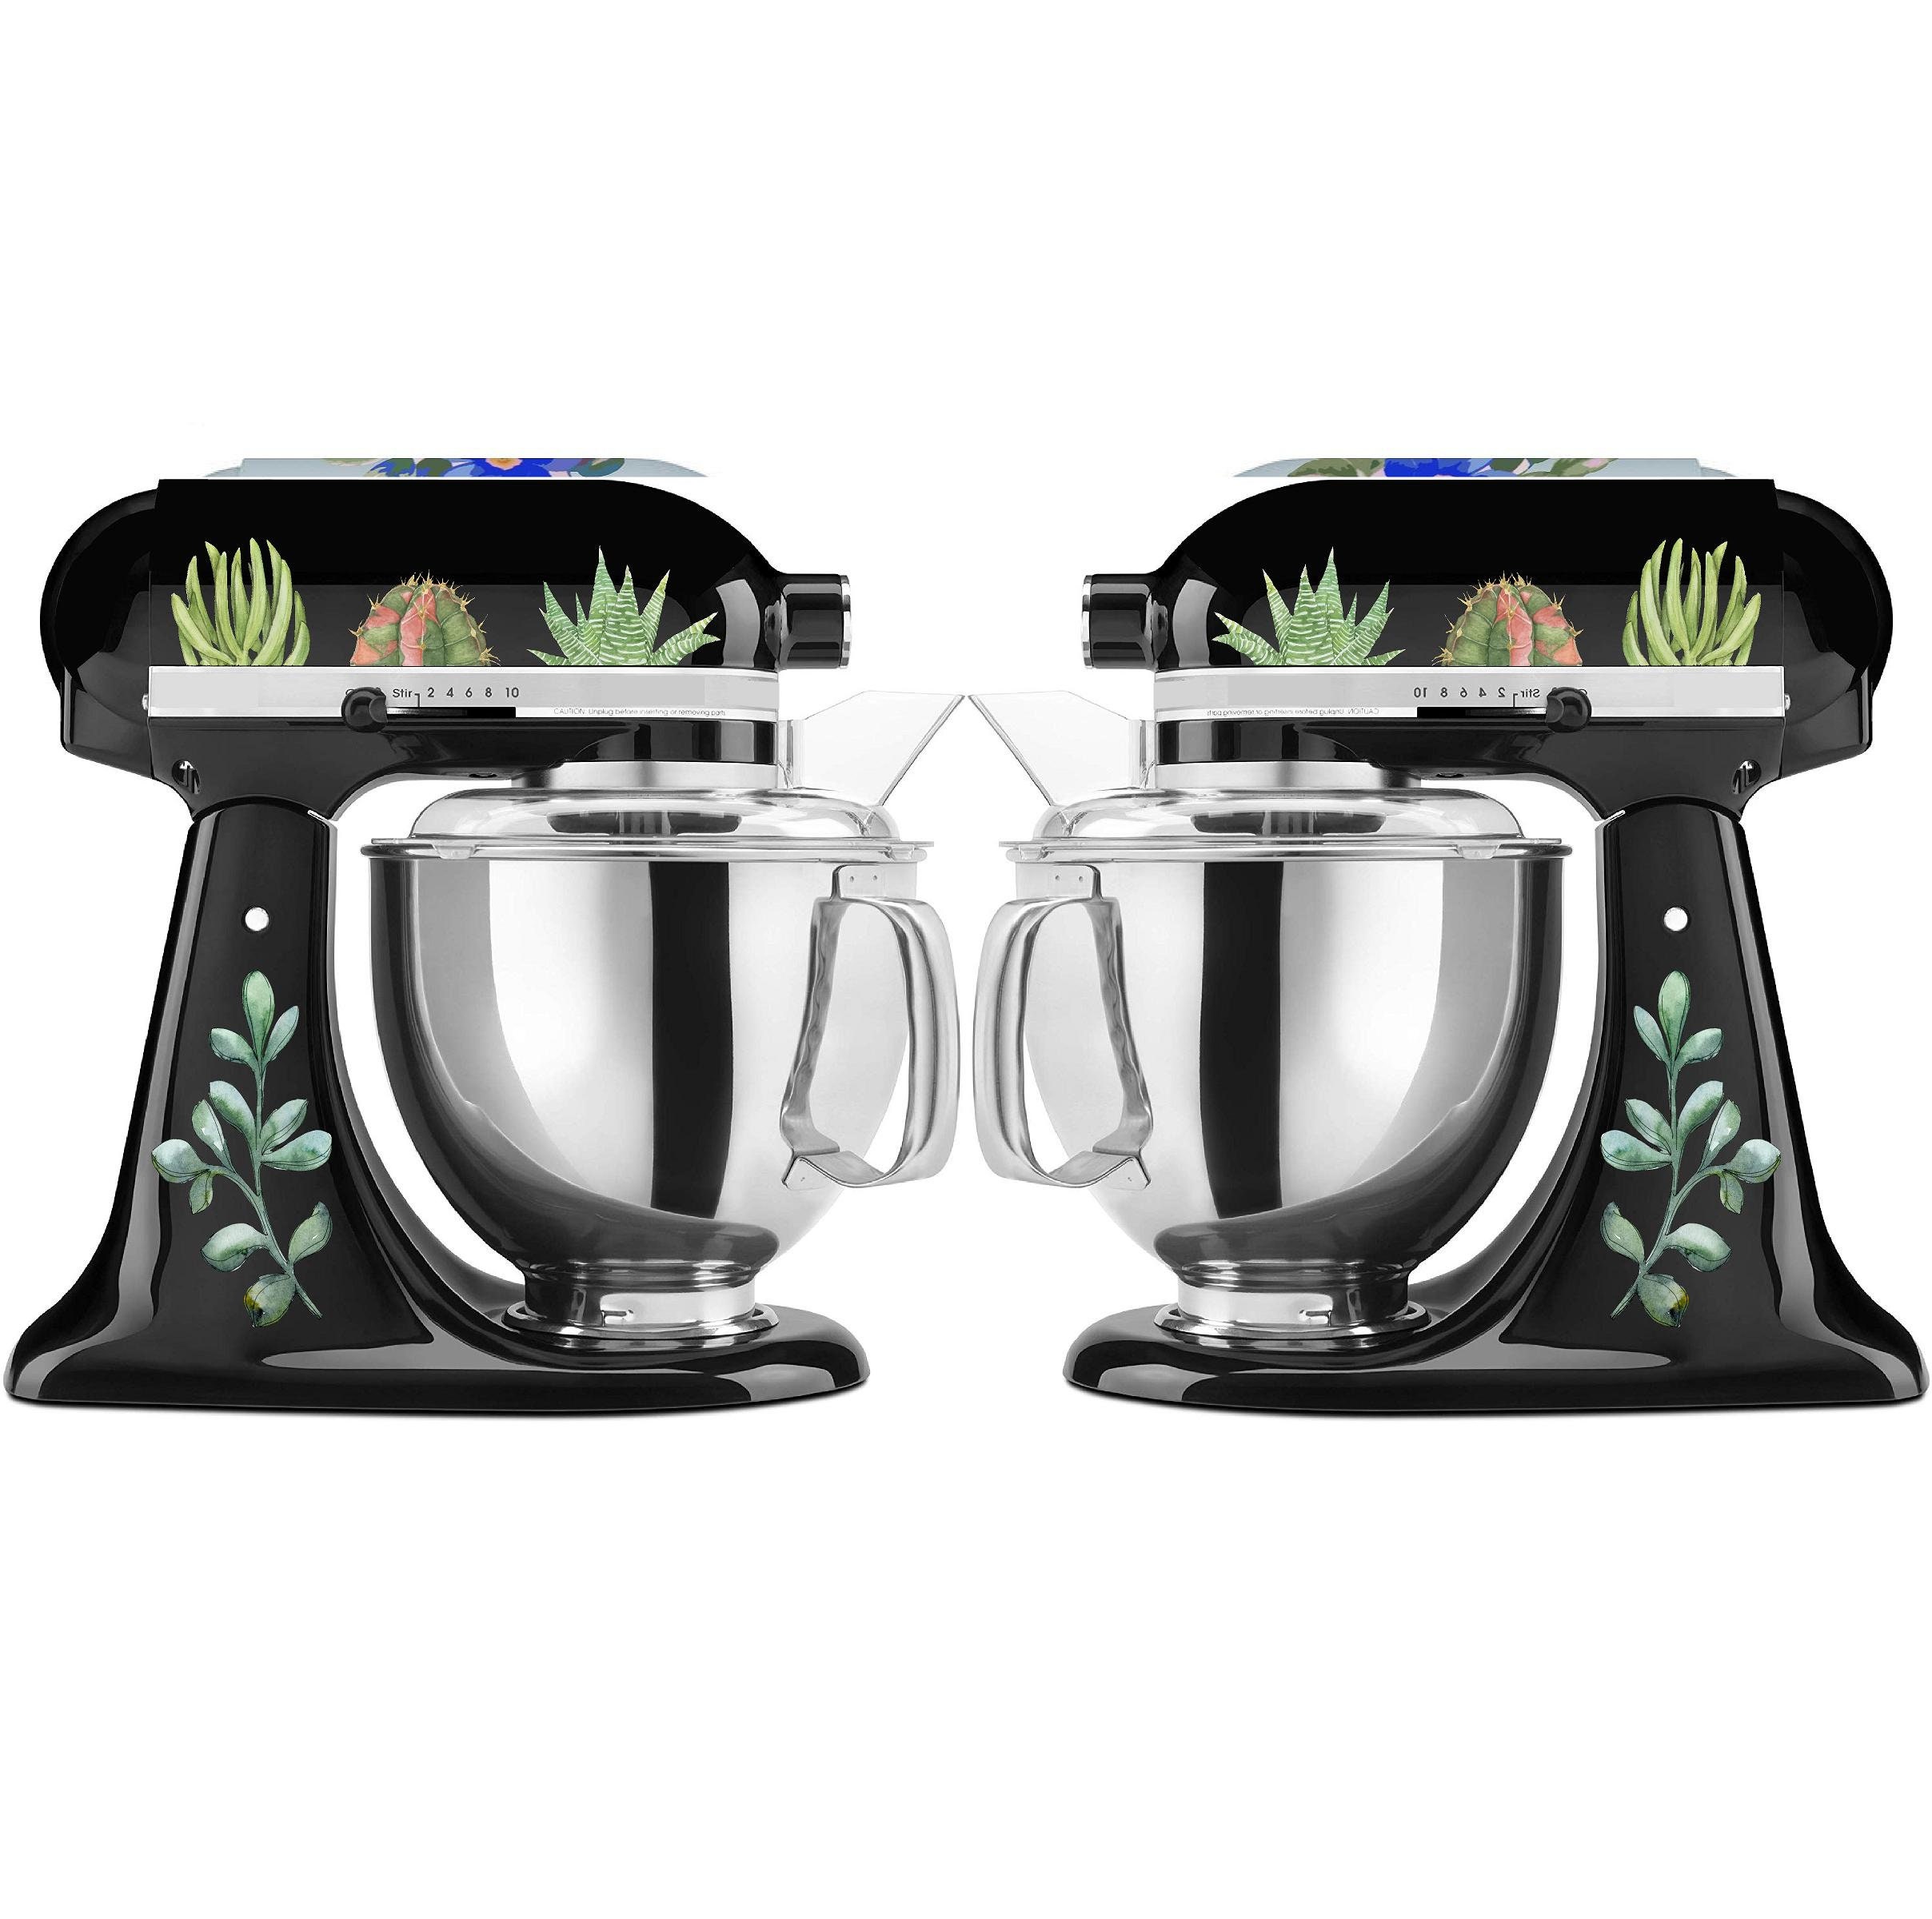 Birds & Berries Cover Compatible With Kitchenaid Stand Mixer sizing Chart  Located in Item Details 